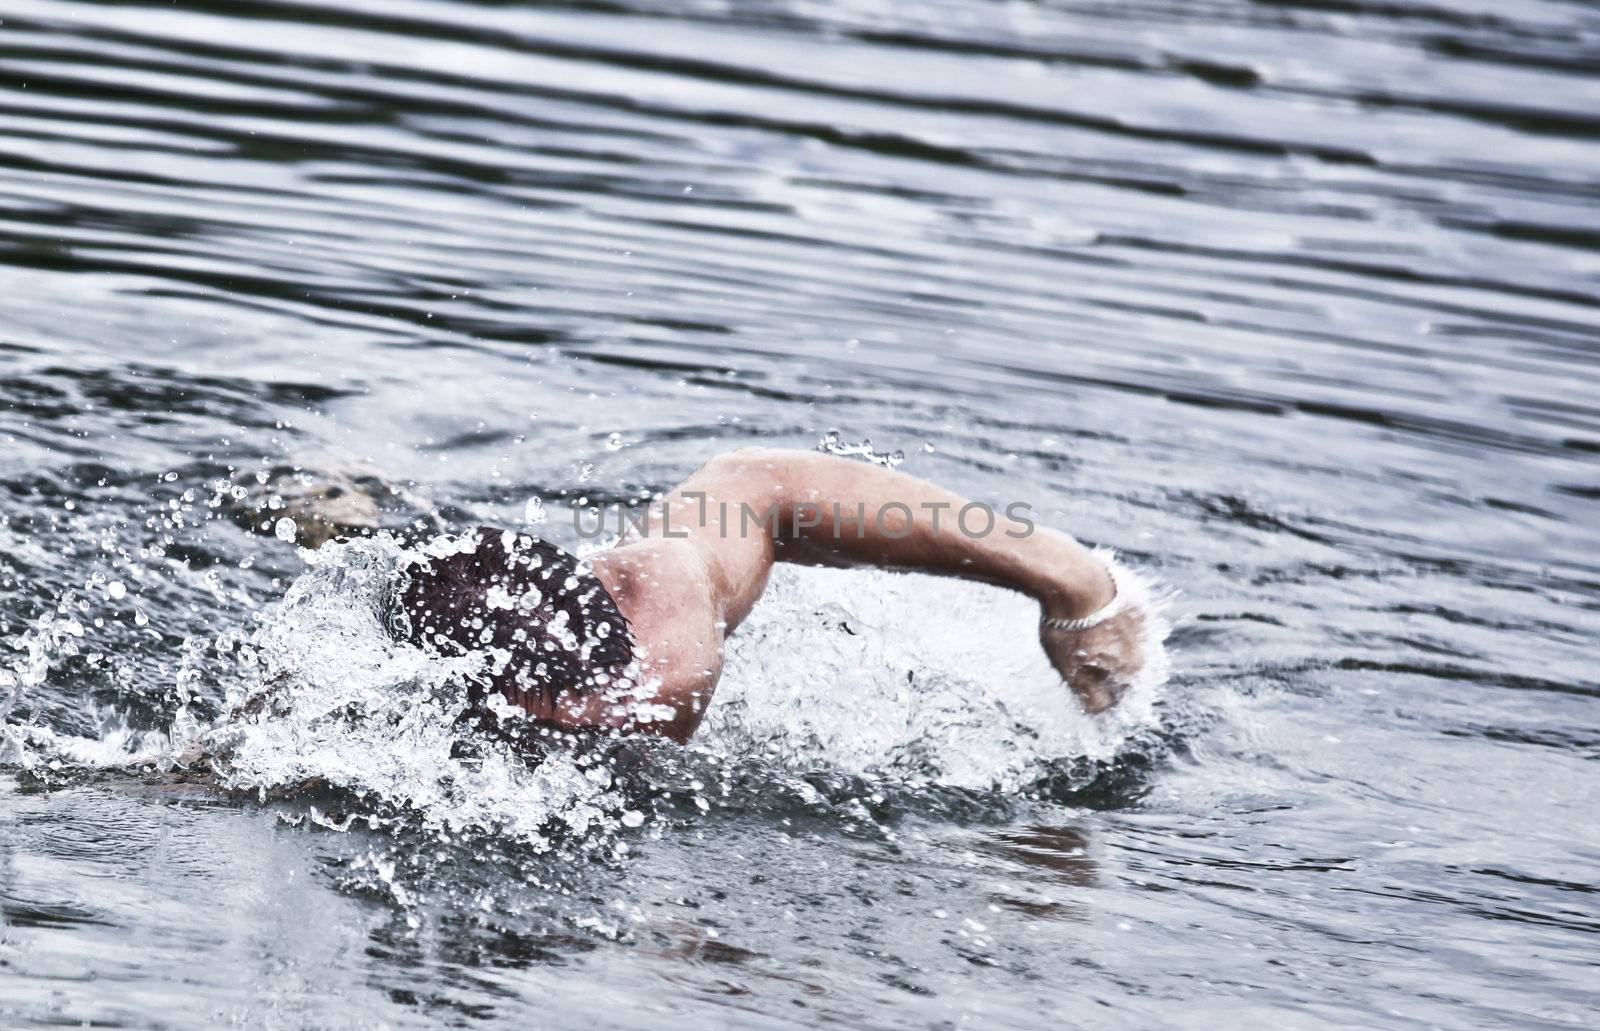 Photo Of A Man Swimming With Passion And Creating Splashes Of Water